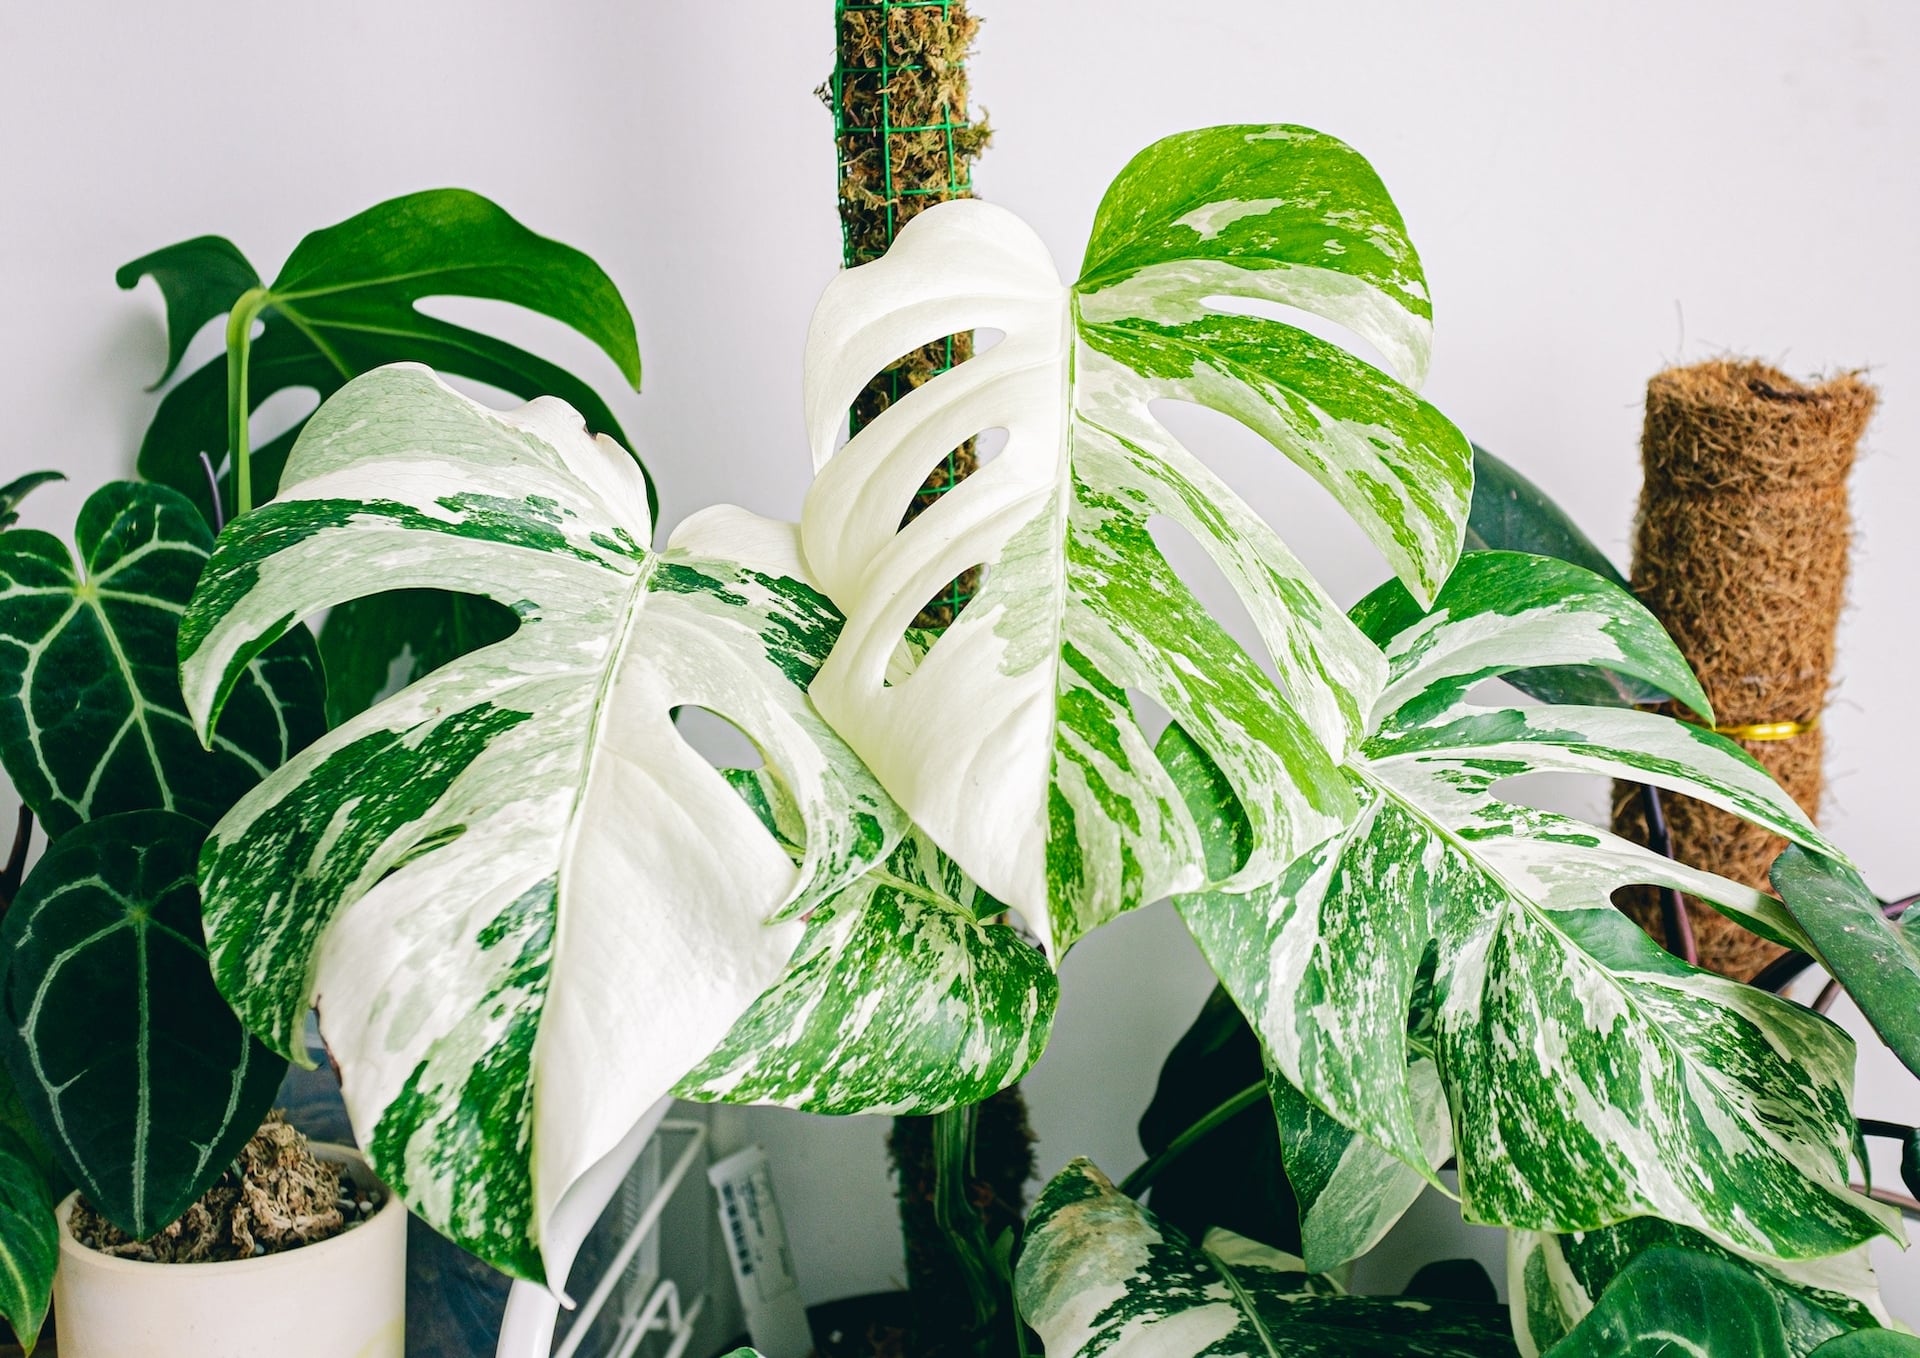 What are the care of the monstera variegata?